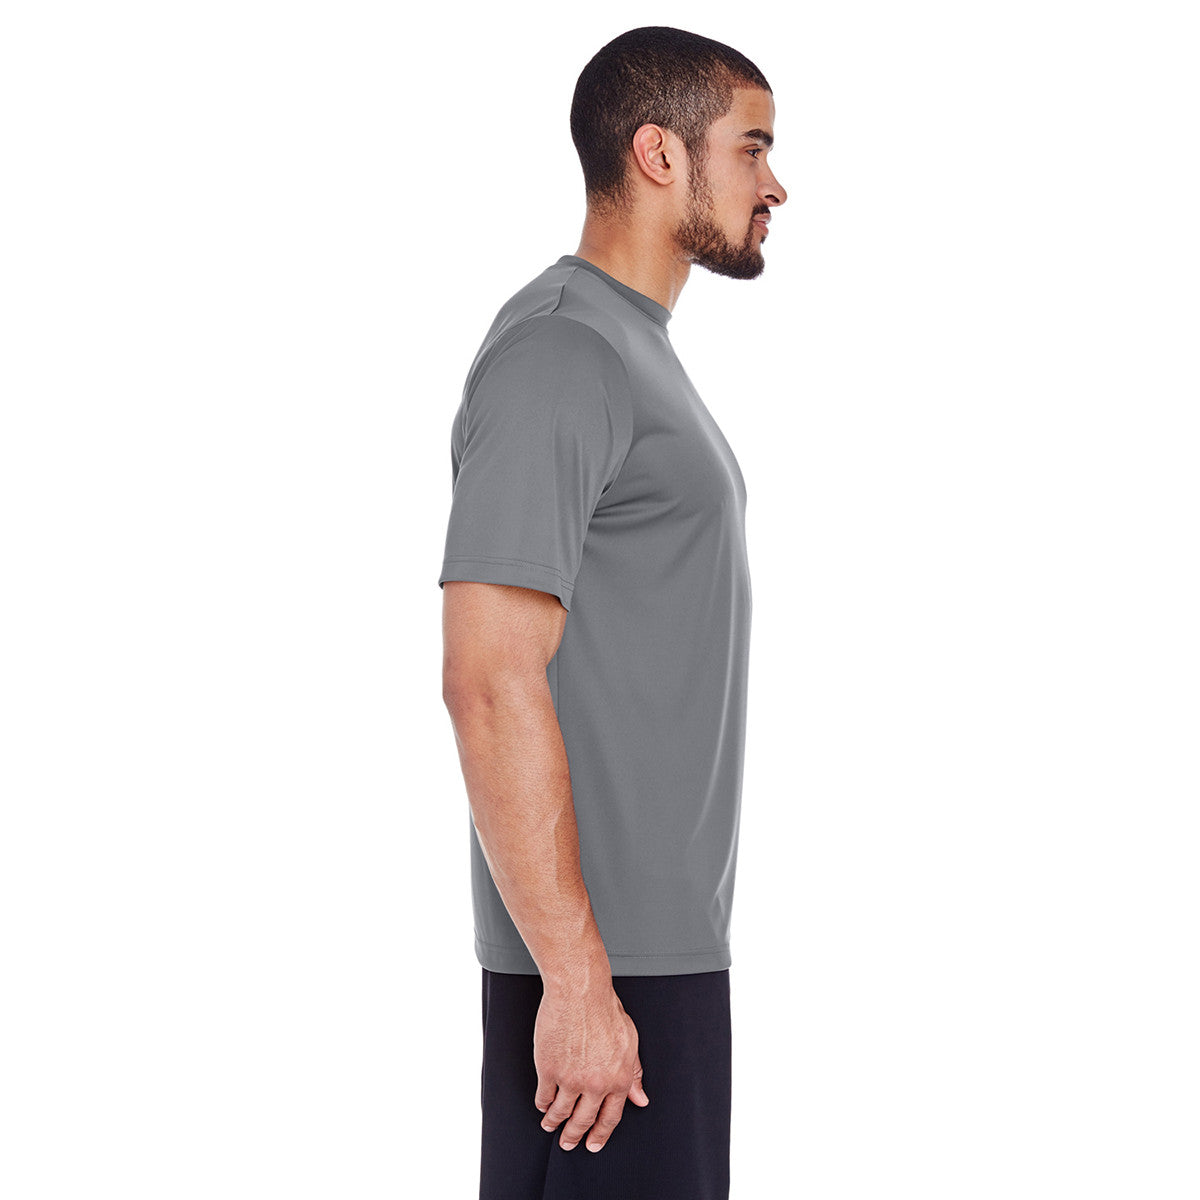 WORK365 LUX Men's Athletic T-Shirt - WORK365 Fitness